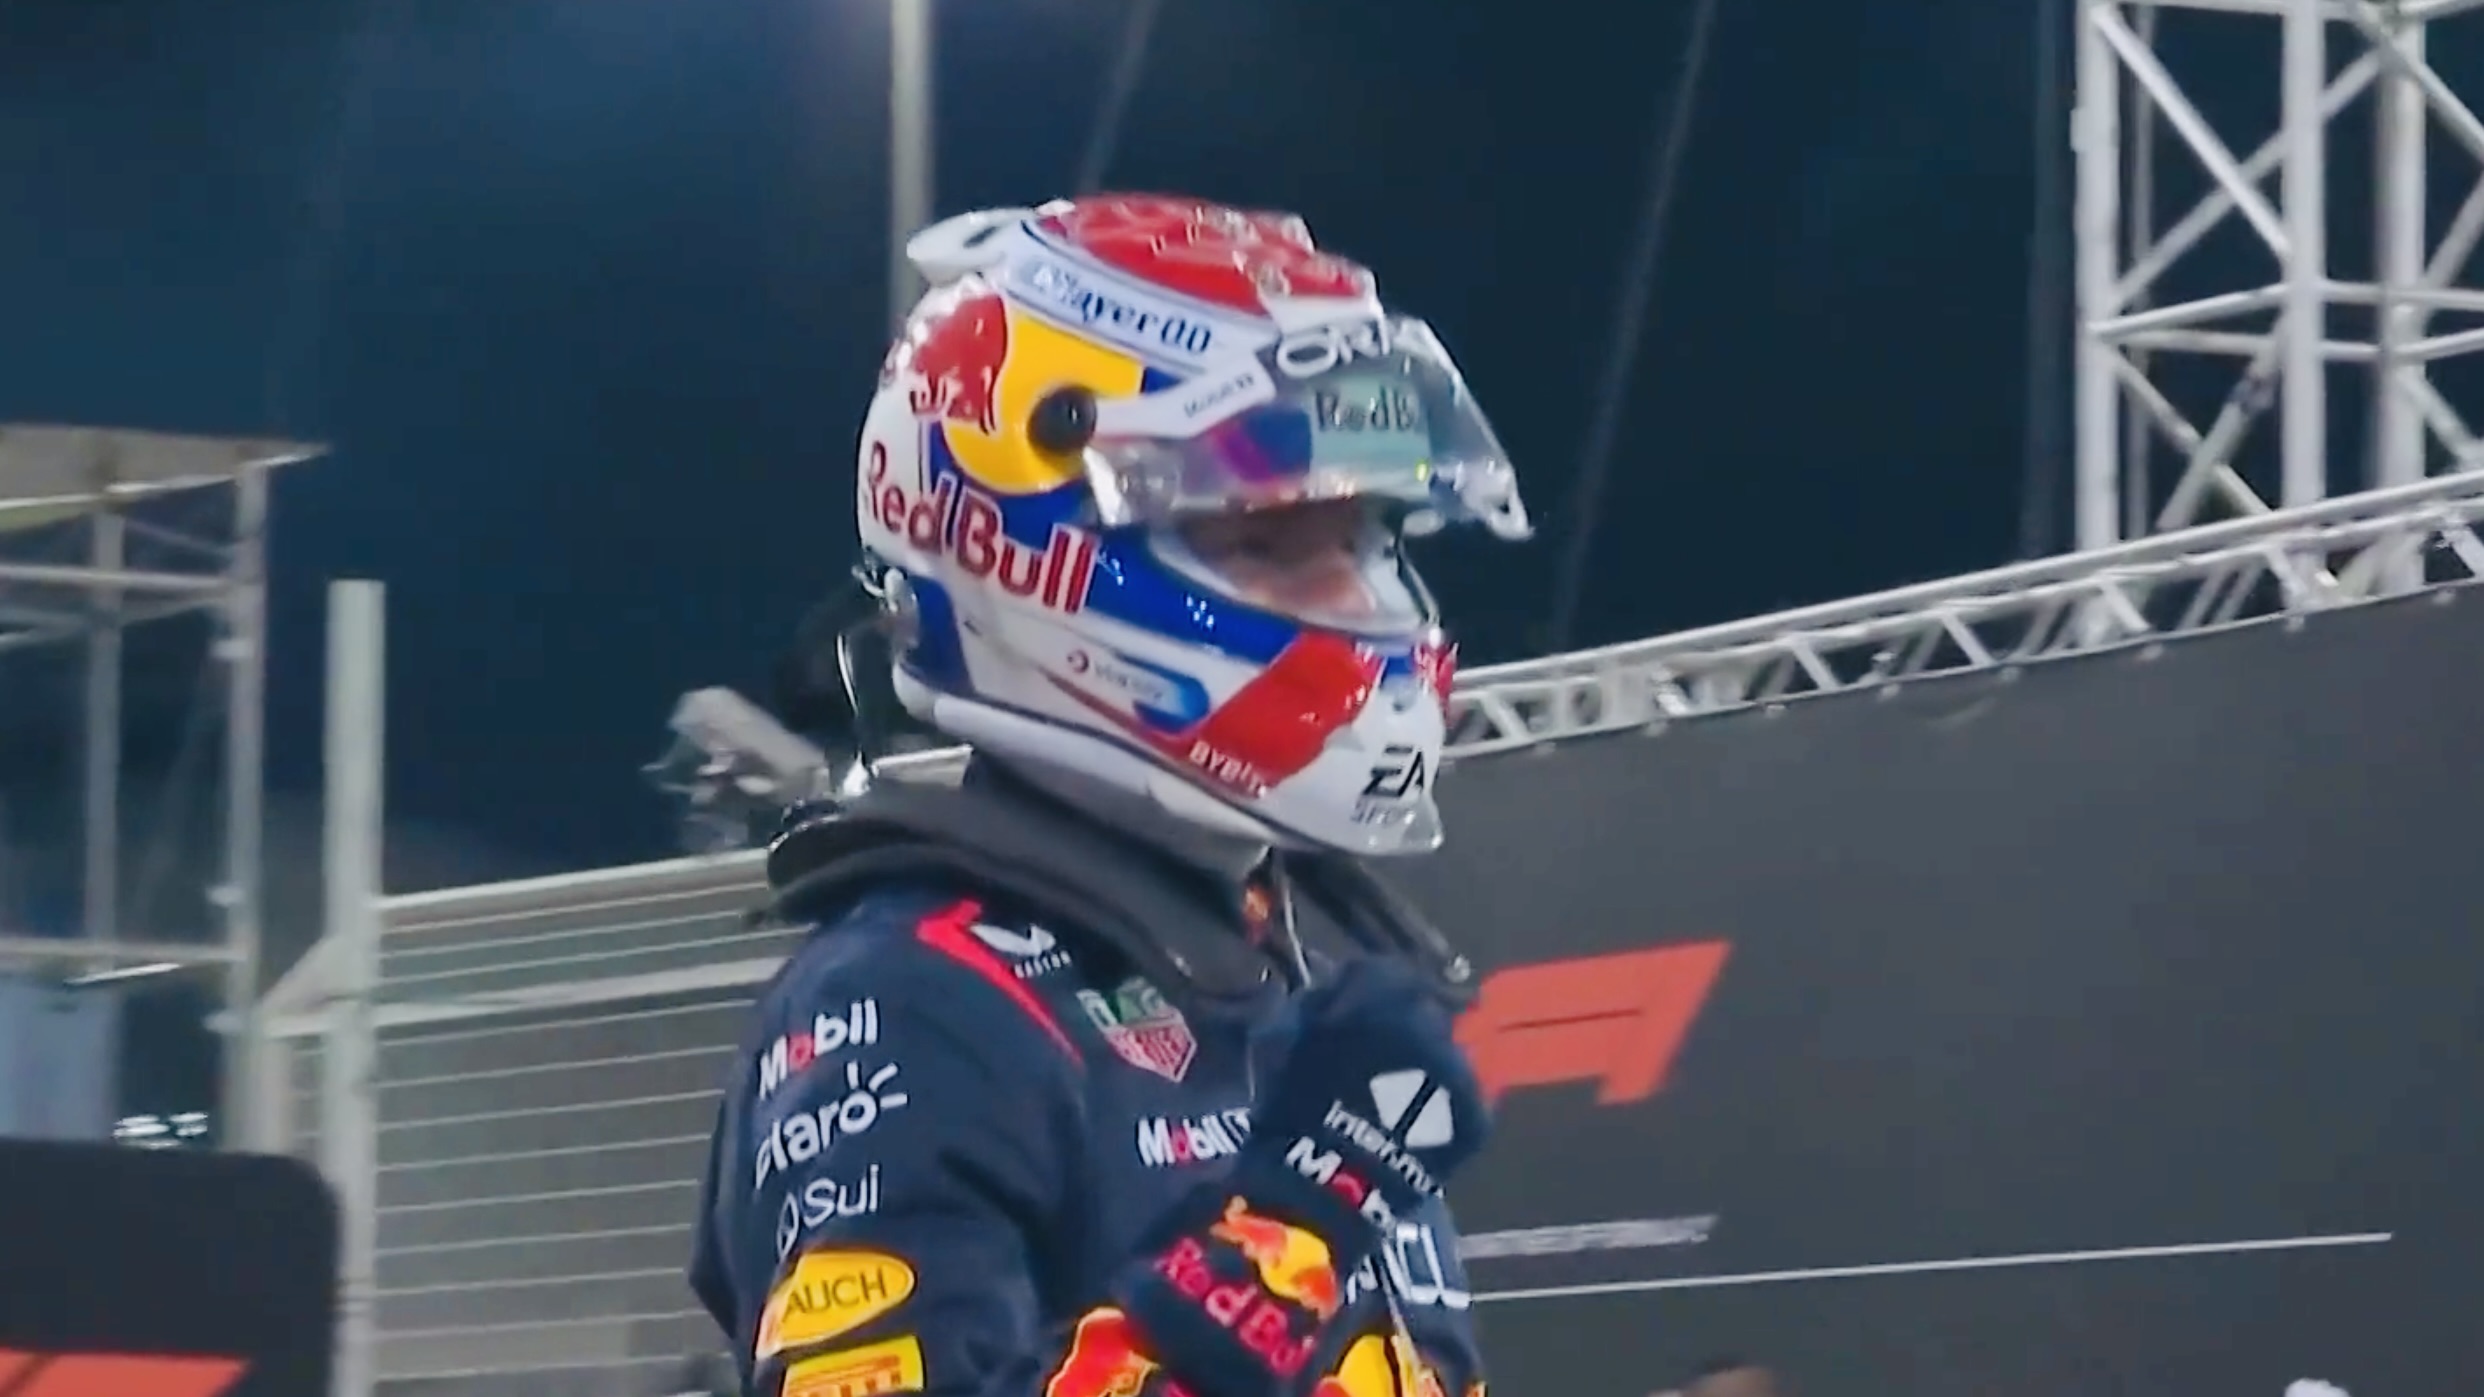 Full Replay: Verstappen, Leclerc & Russell on Front of the Grid